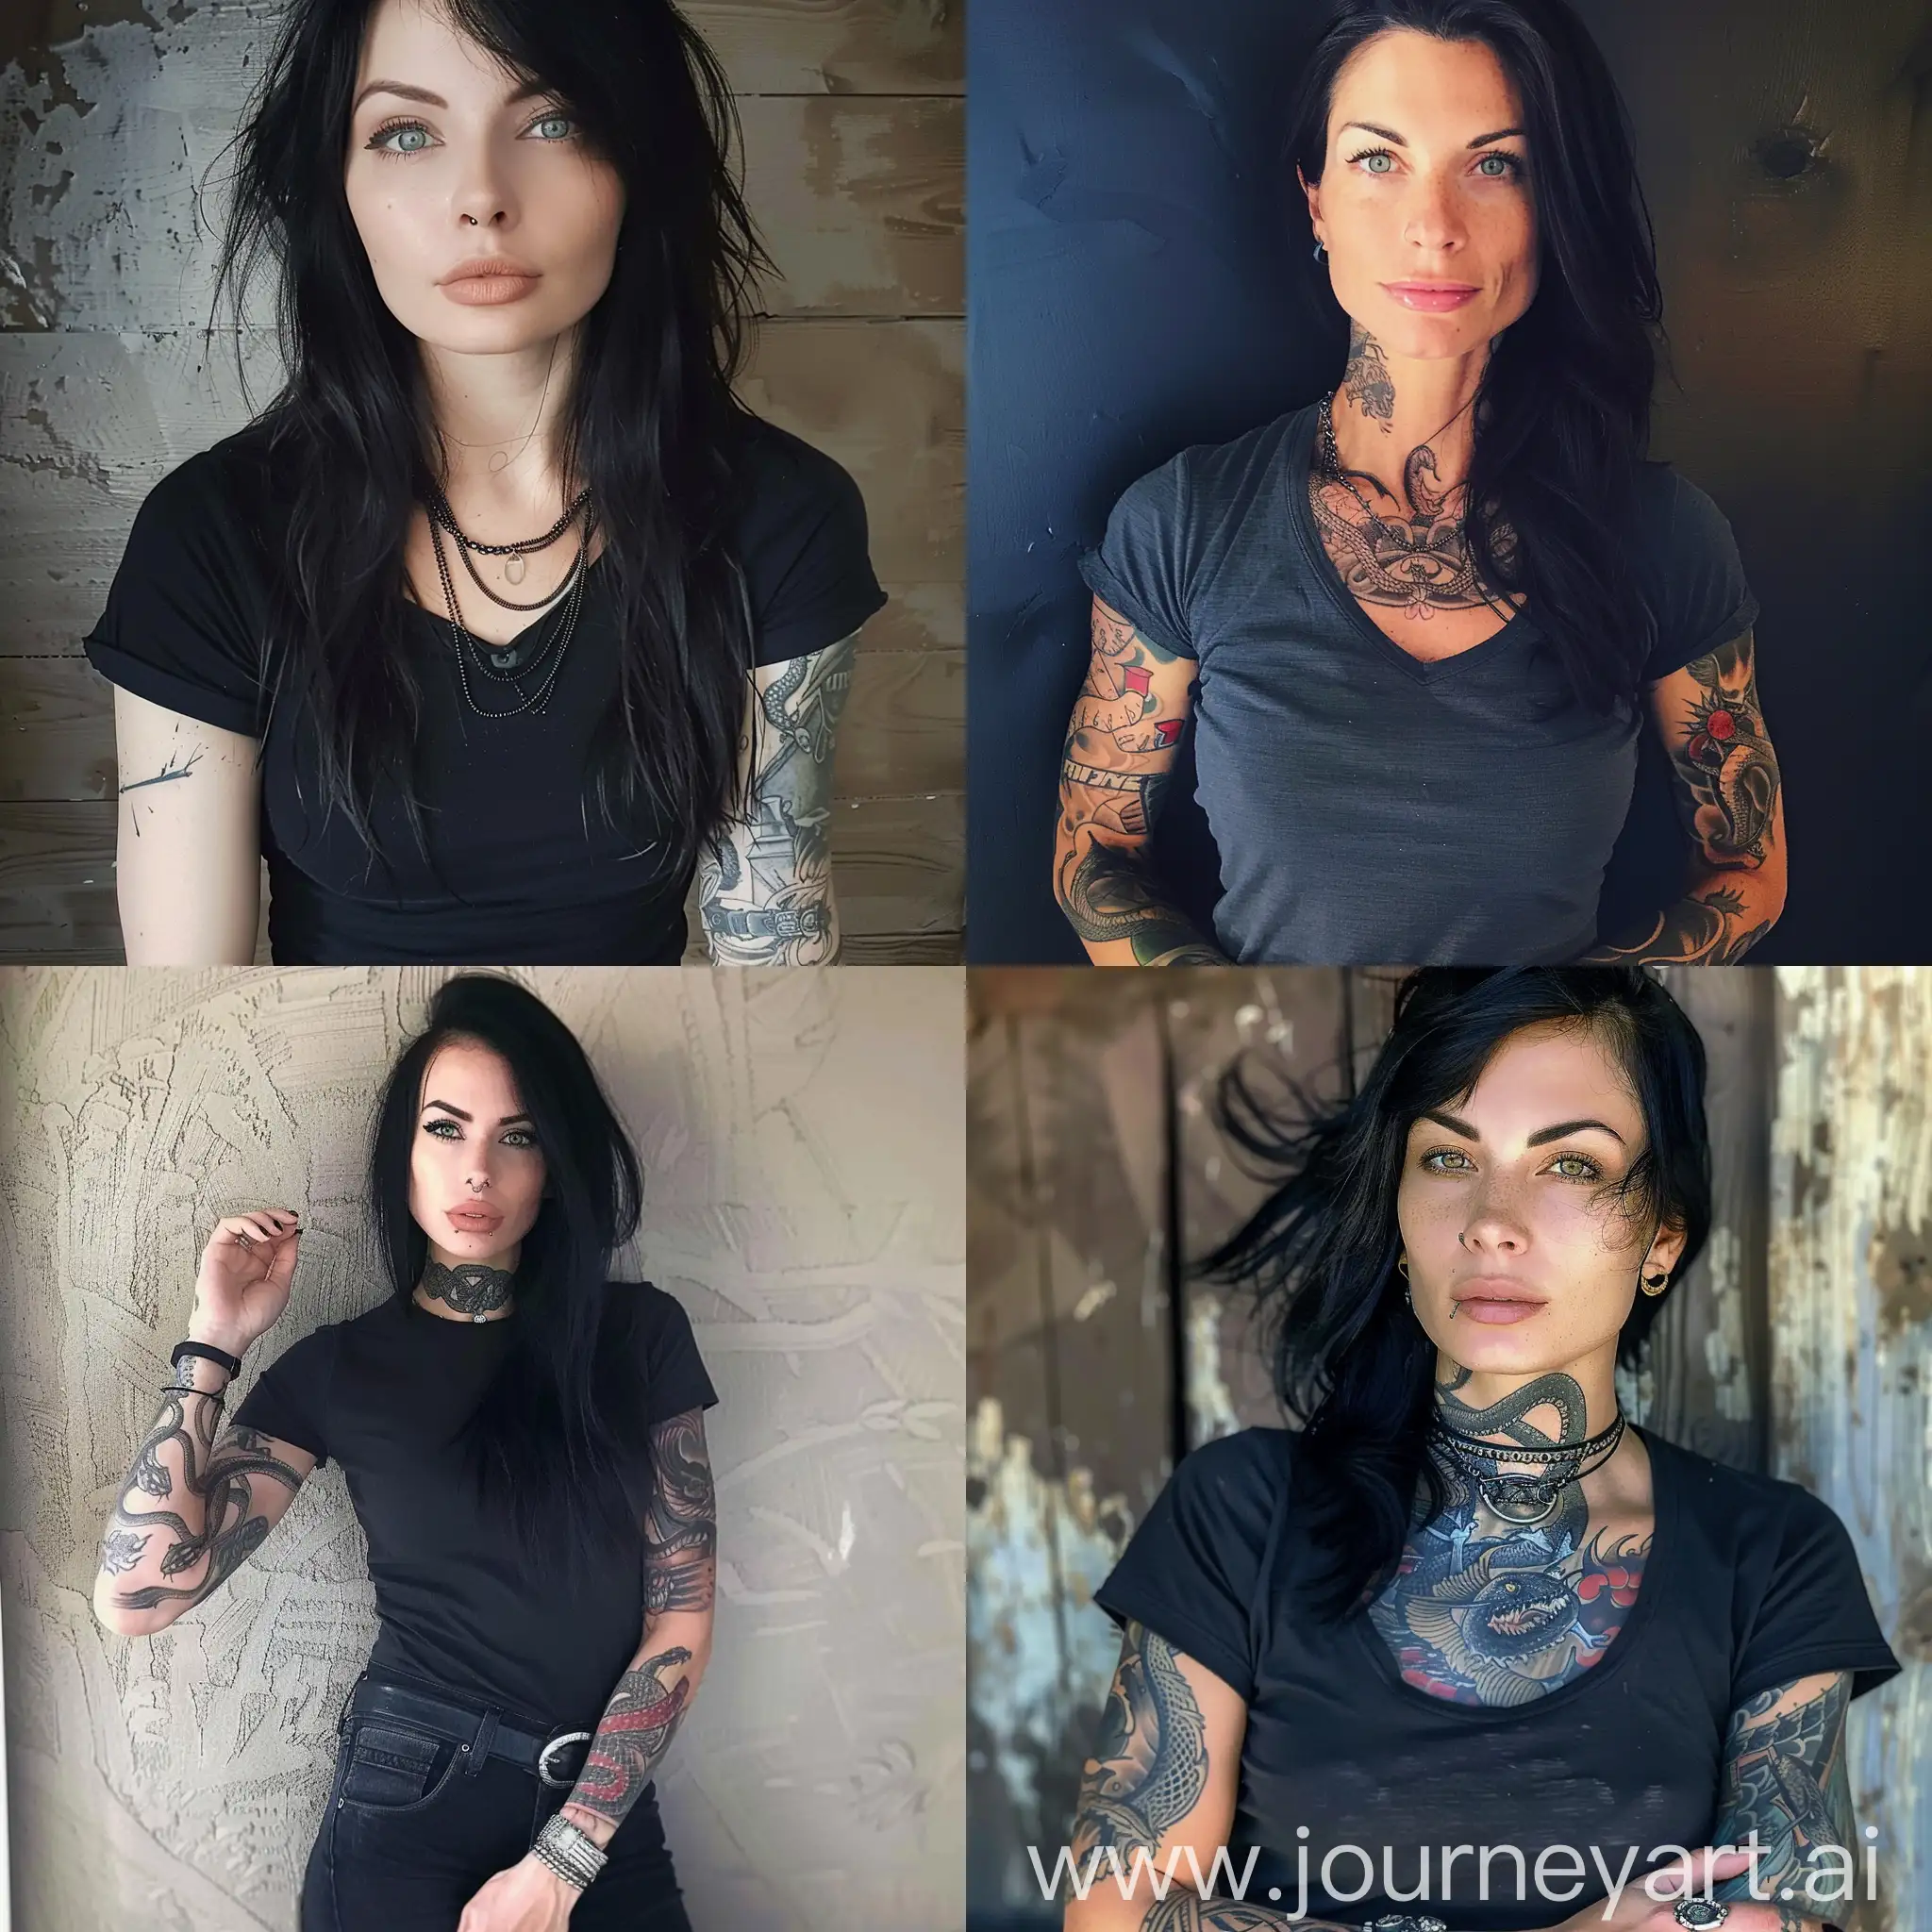 Muscular-Woman-with-Snake-Tattoo-and-Green-Eyes-in-Black-Jeans-and-TShirt